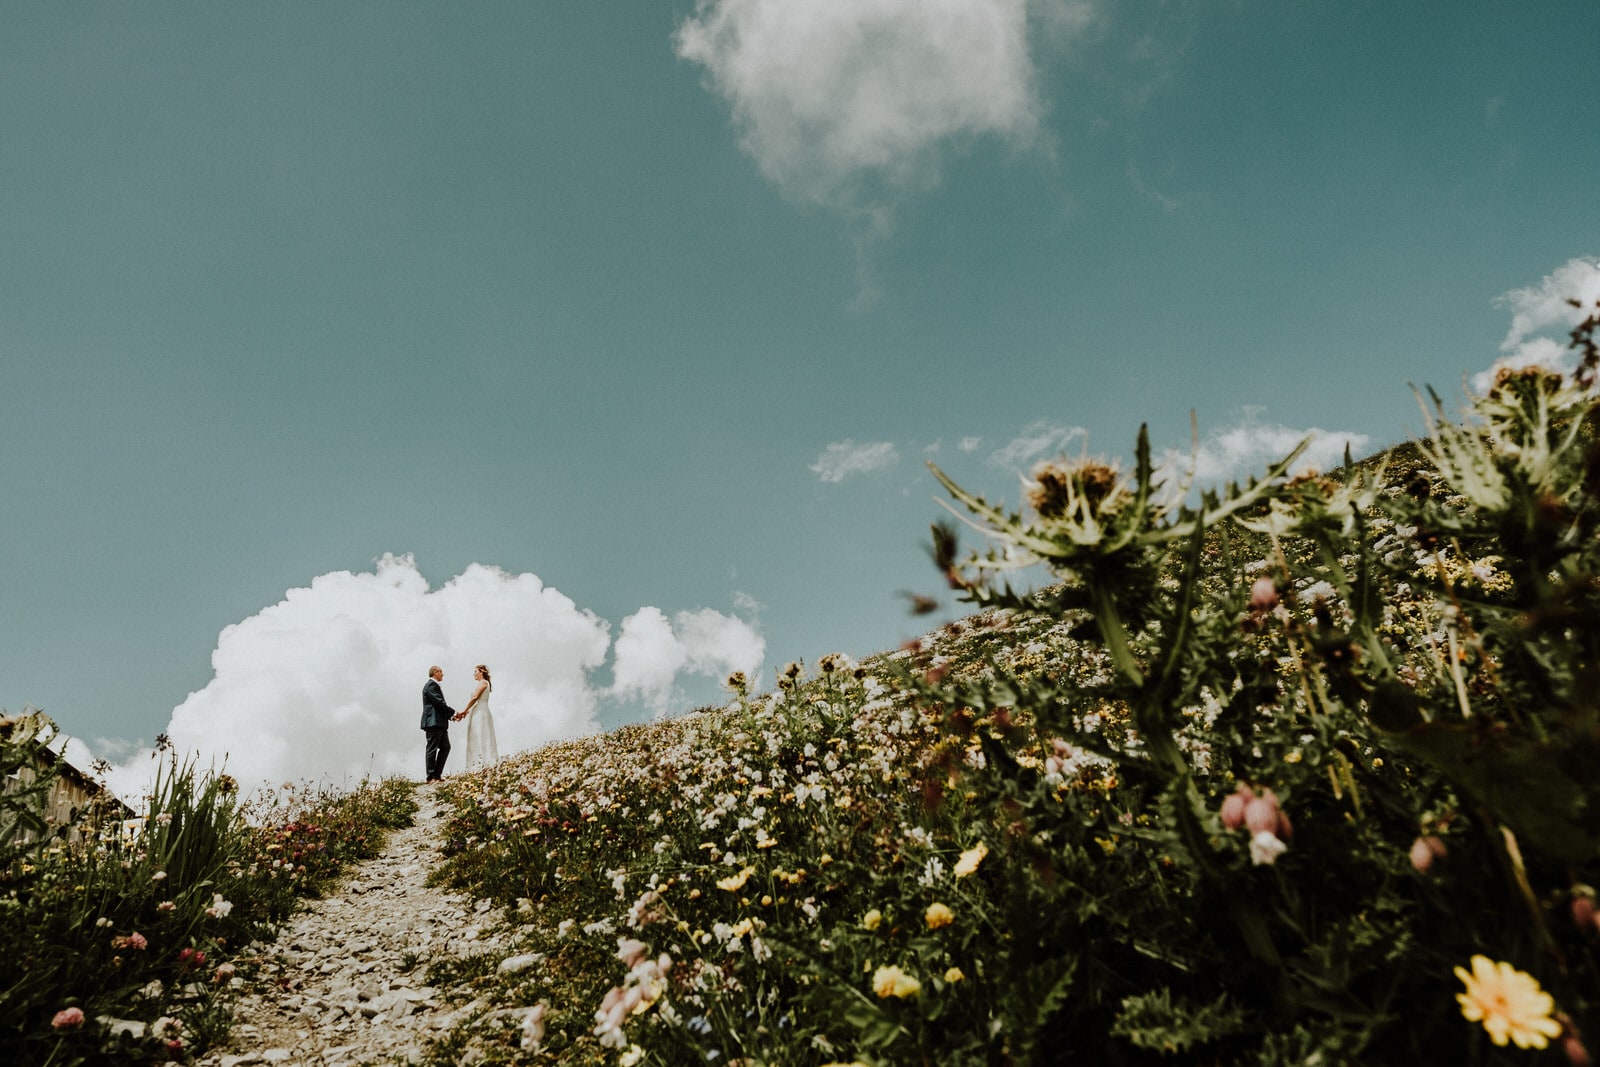 After-wedding shoot in Lech Austria by Wild Connections Photography